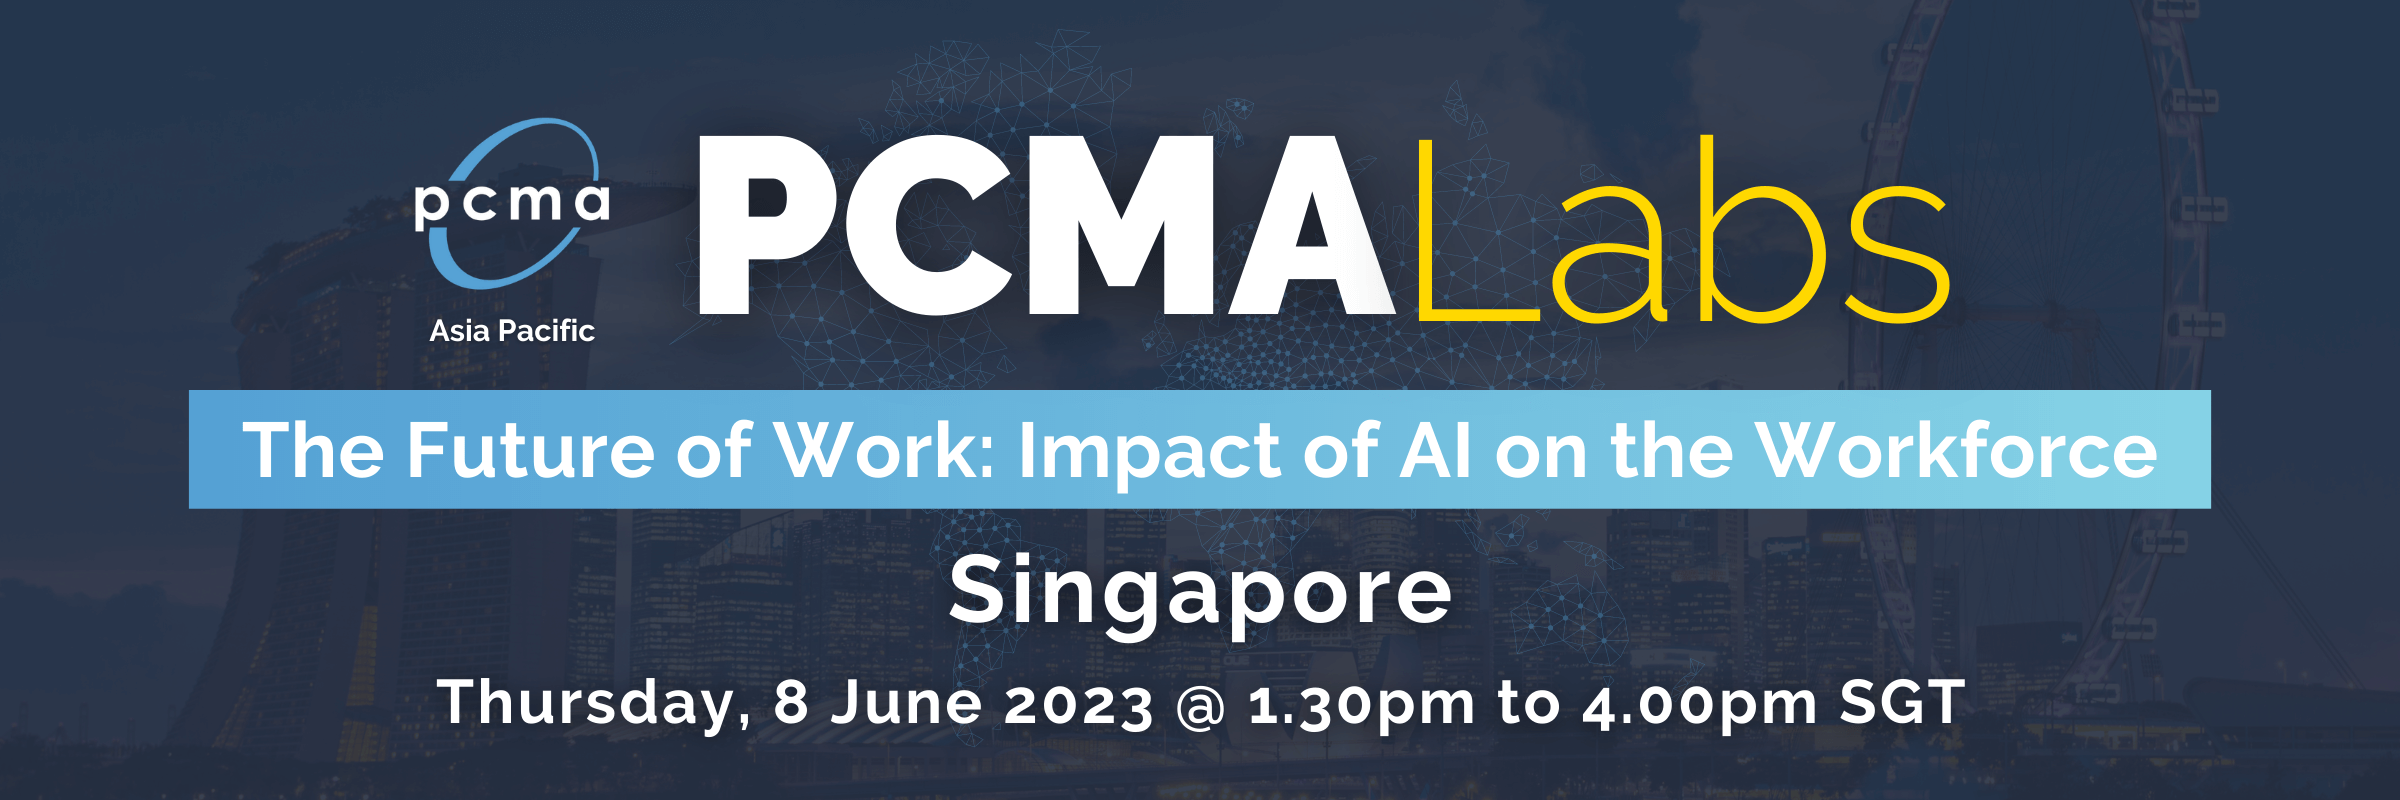 PCMA APAC Labs (Singapore) - The Future of Work: Impact of AI on the Workforce on 8 June 2023